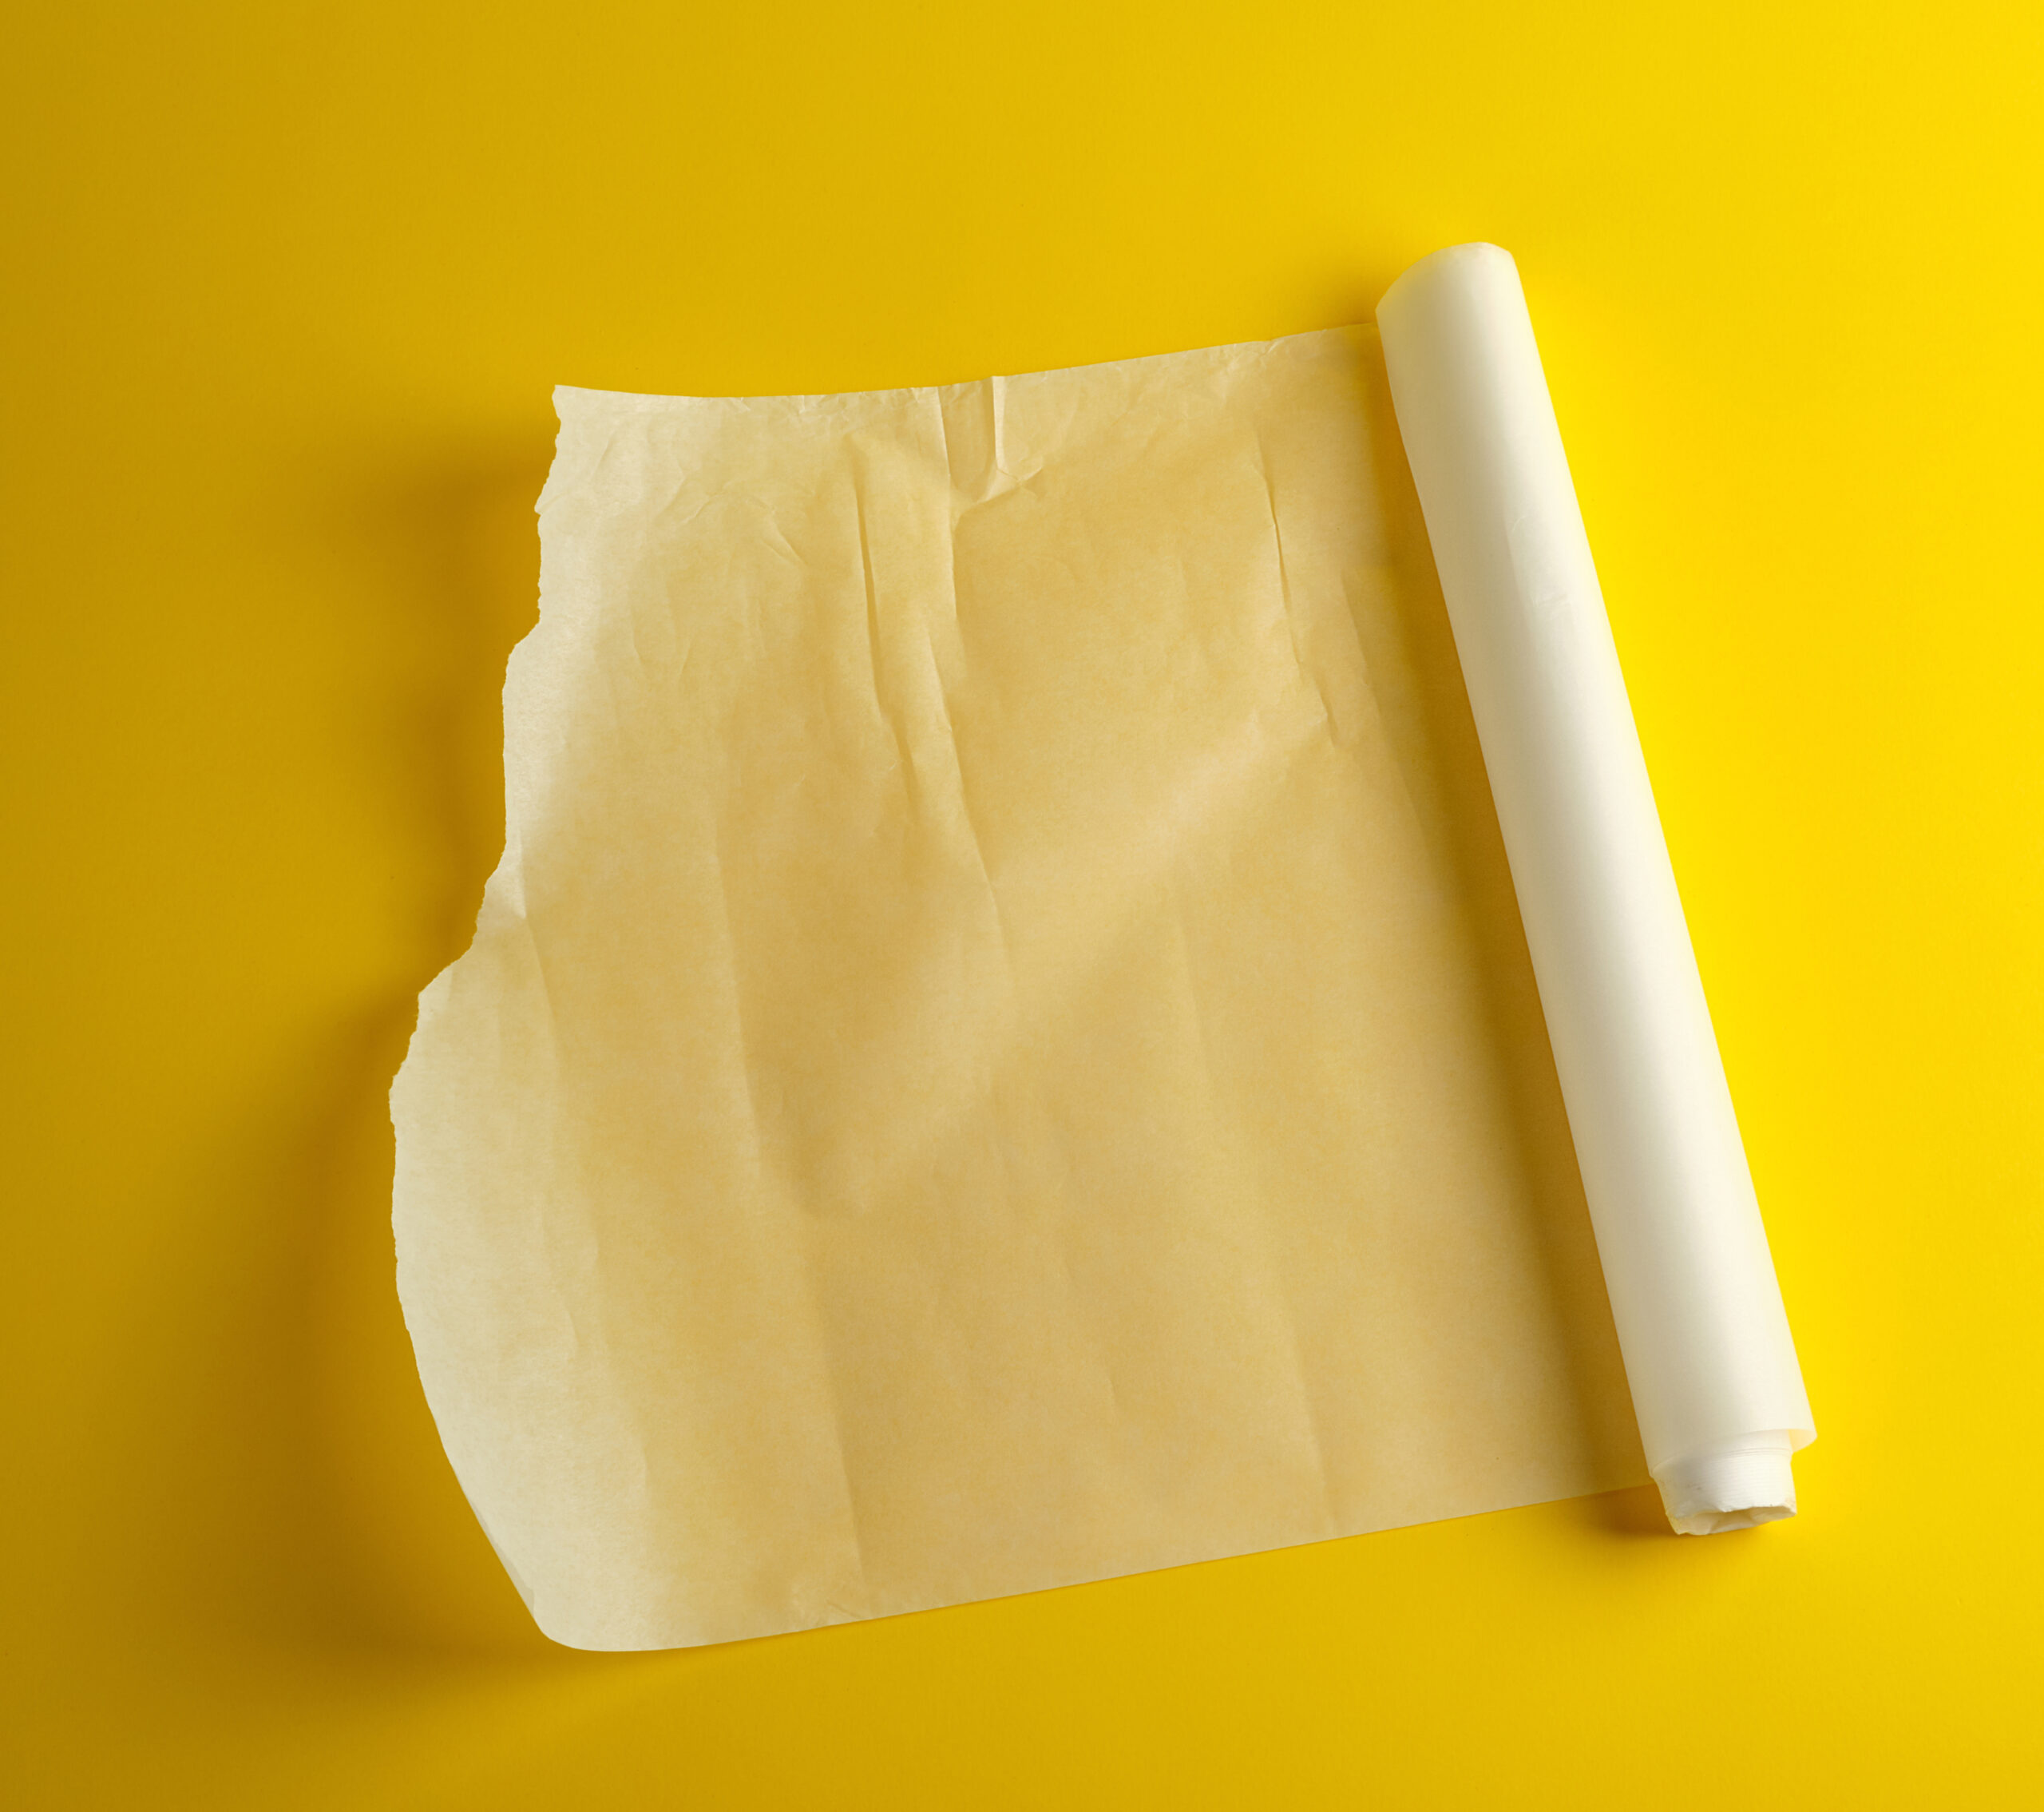 Uses of wax paper